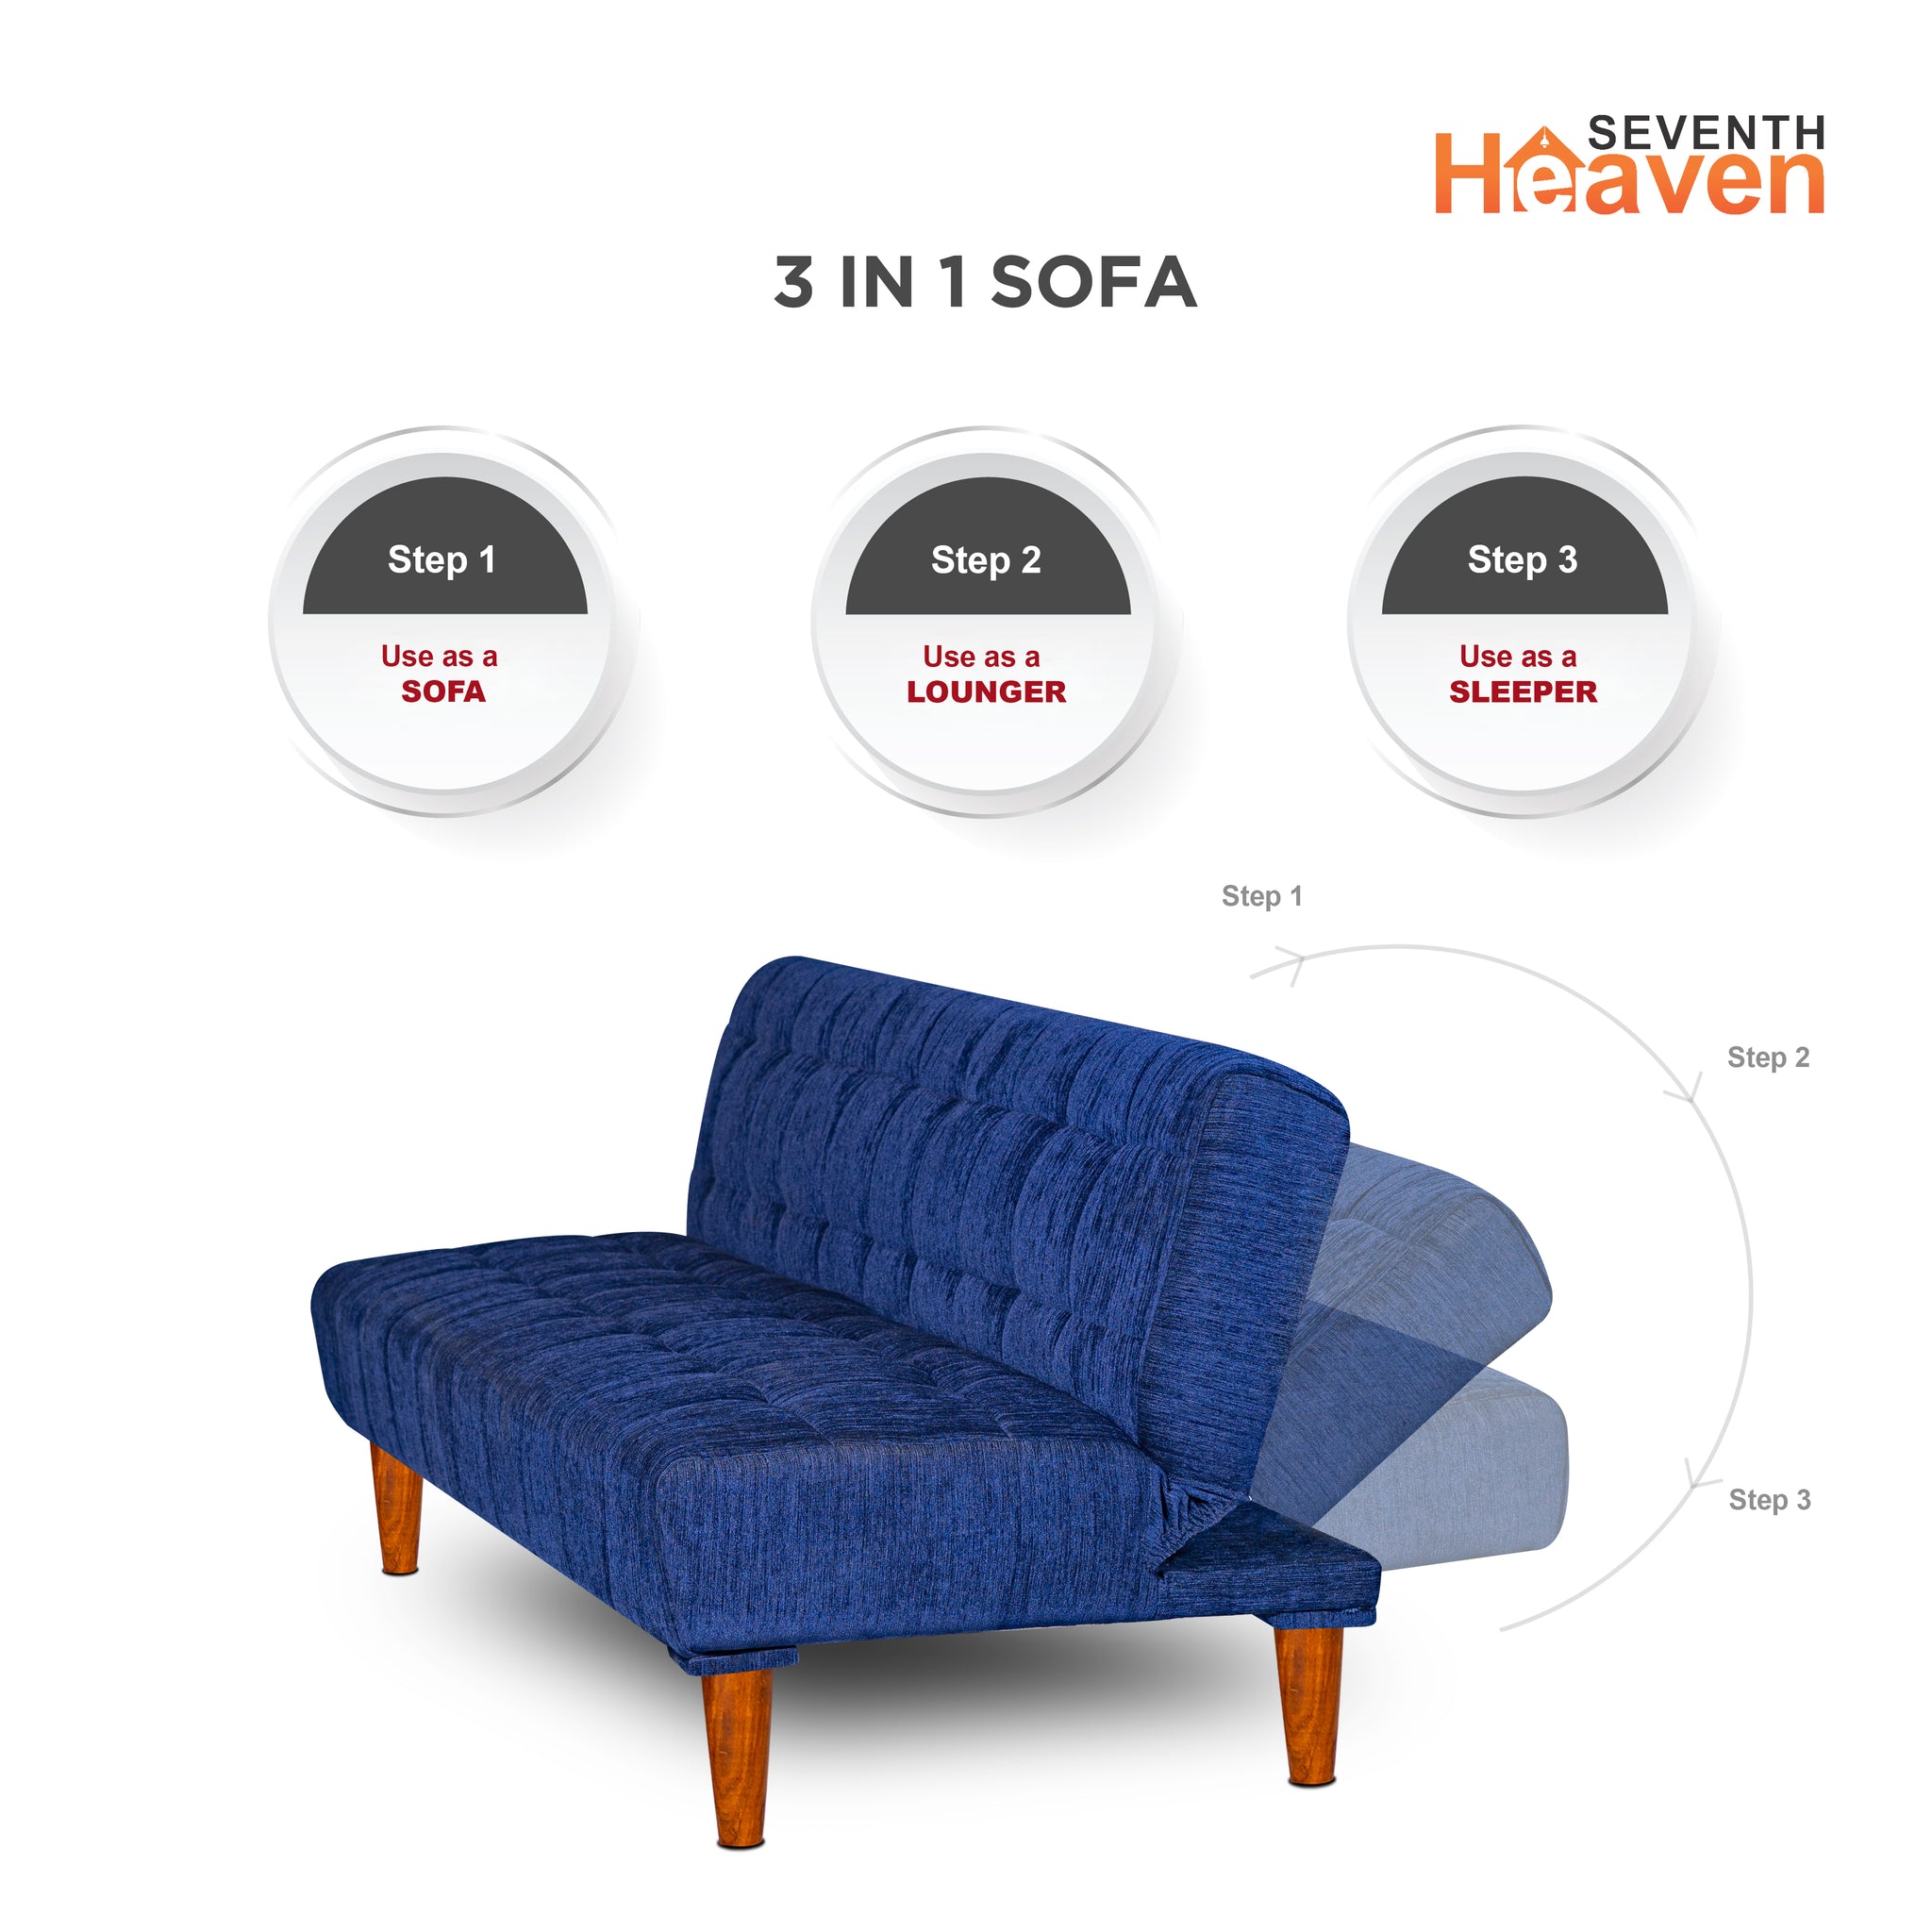 Seventh Heaven Florida Neo 4 Seater Wooden Sofa Cum Bed Modern & Elegant Smart Furniture Range for luxurious homes, living rooms and offices. Use as a sofa, lounger or bed. Perfect for guests. Molphino fabric with sheesham polished wooden legs. Blue colour.